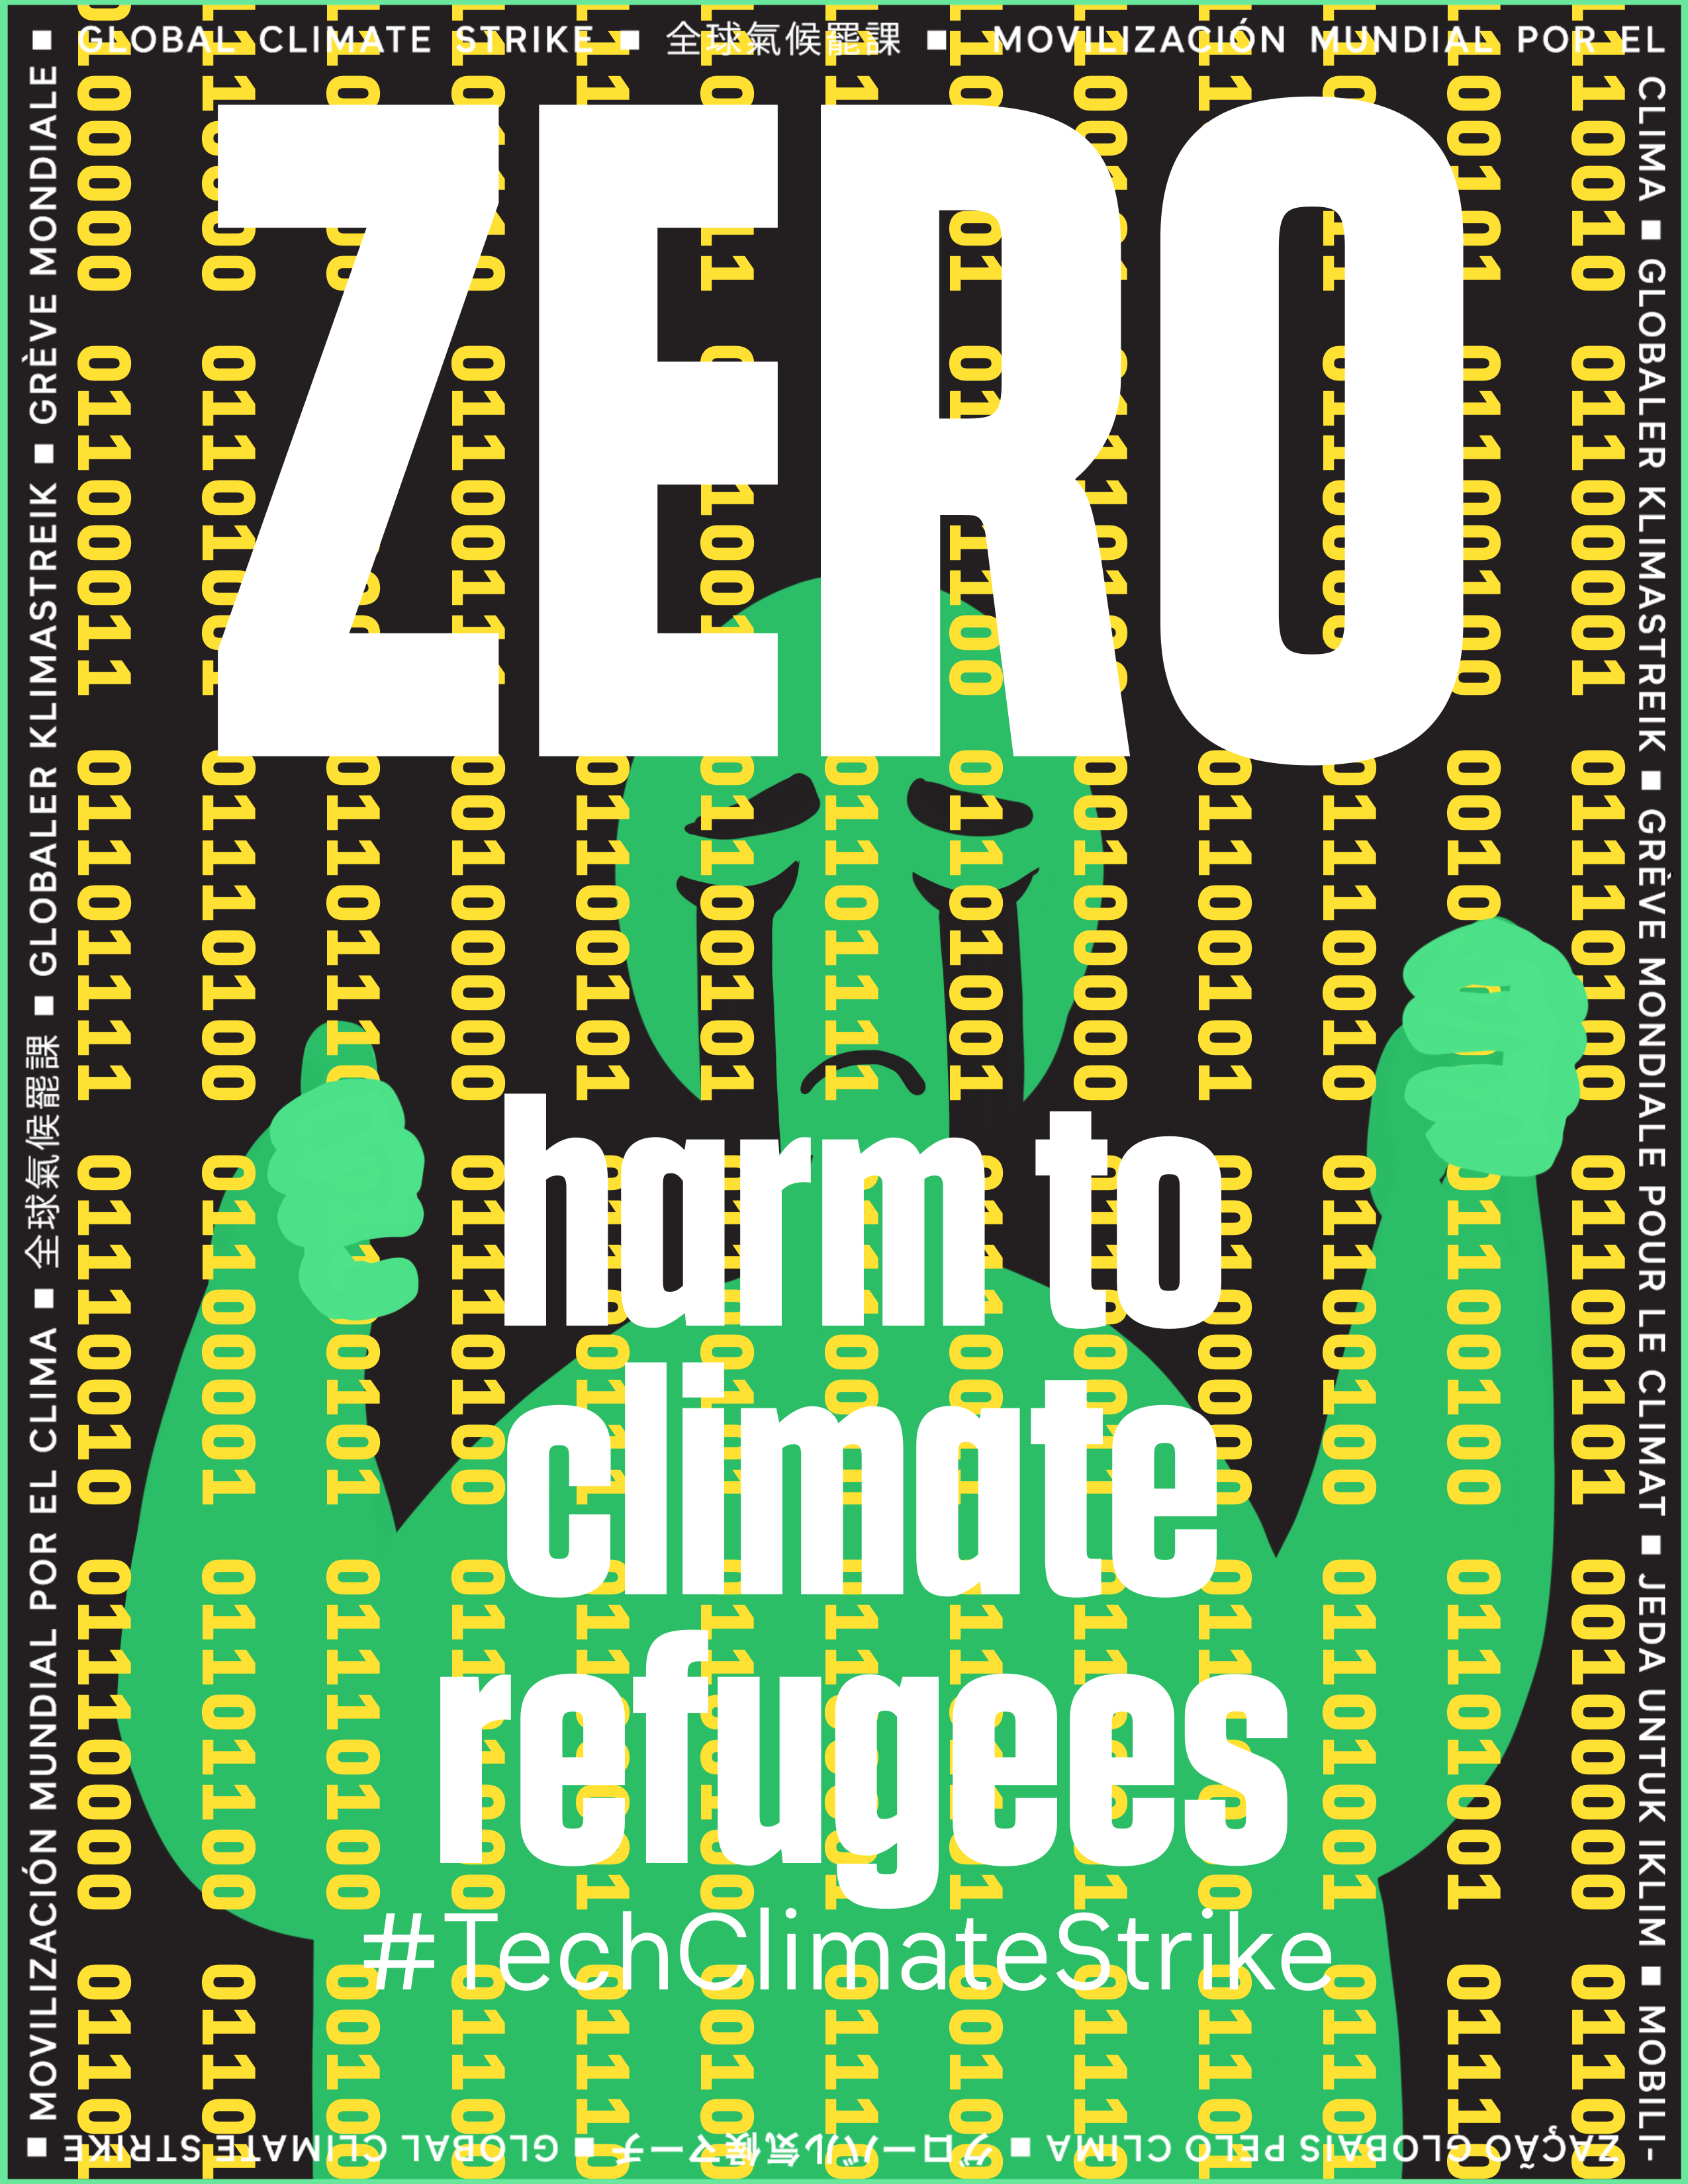 Zero harm to climate refugees and frontline communities